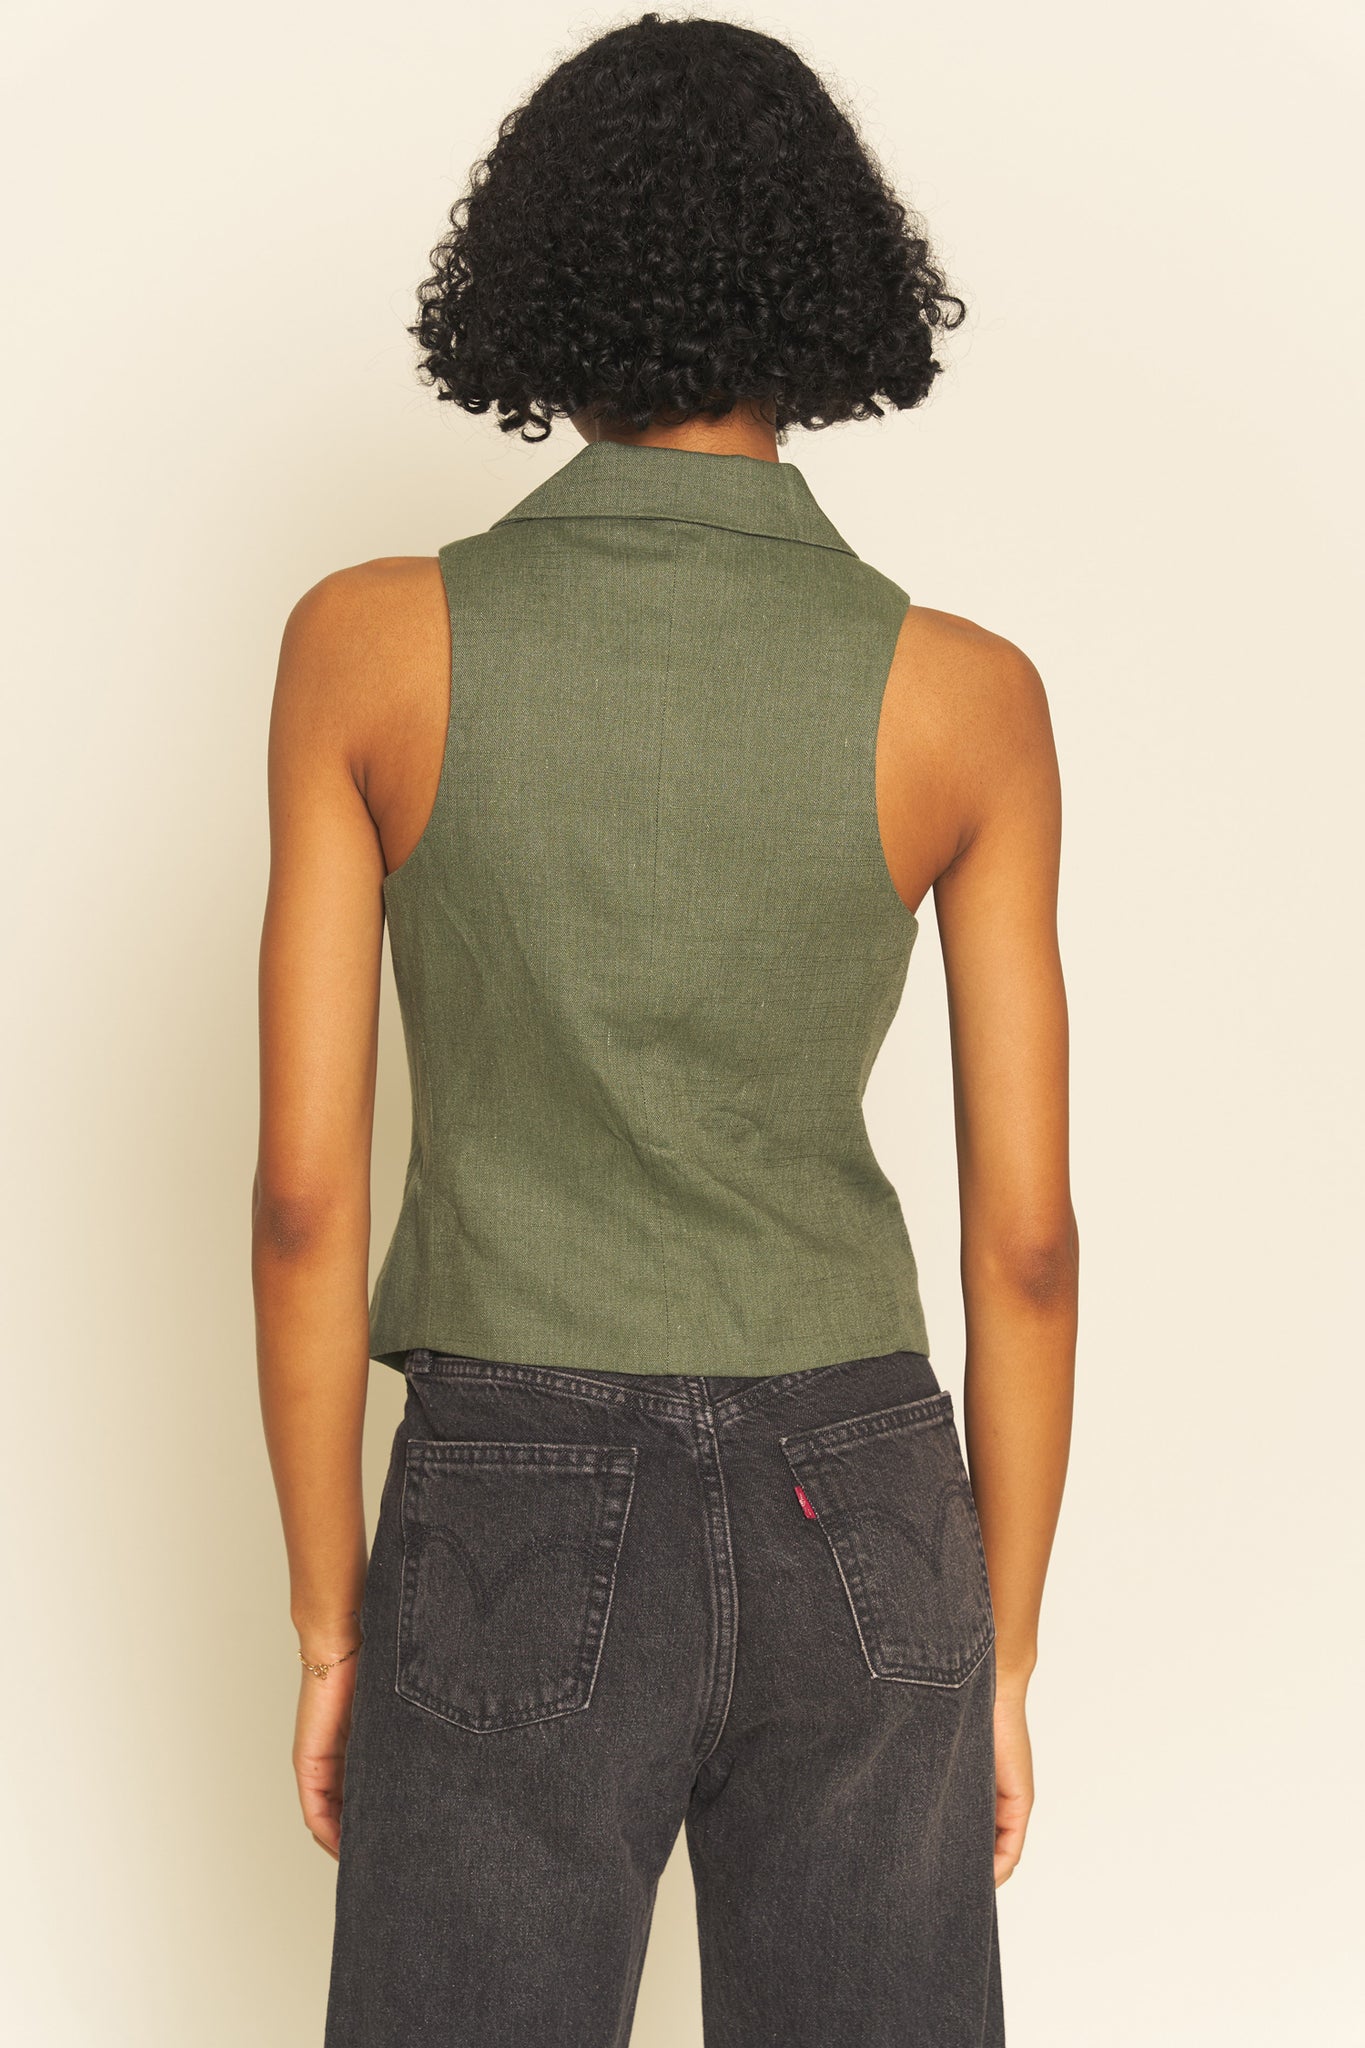 V Neck Linen Vest Lapel Collar Slightly Fitted Silhouette Sleeveless Deep Green Color-Way Workwear Office Wear Professional Womens Style Fashion Neutral Staple Style